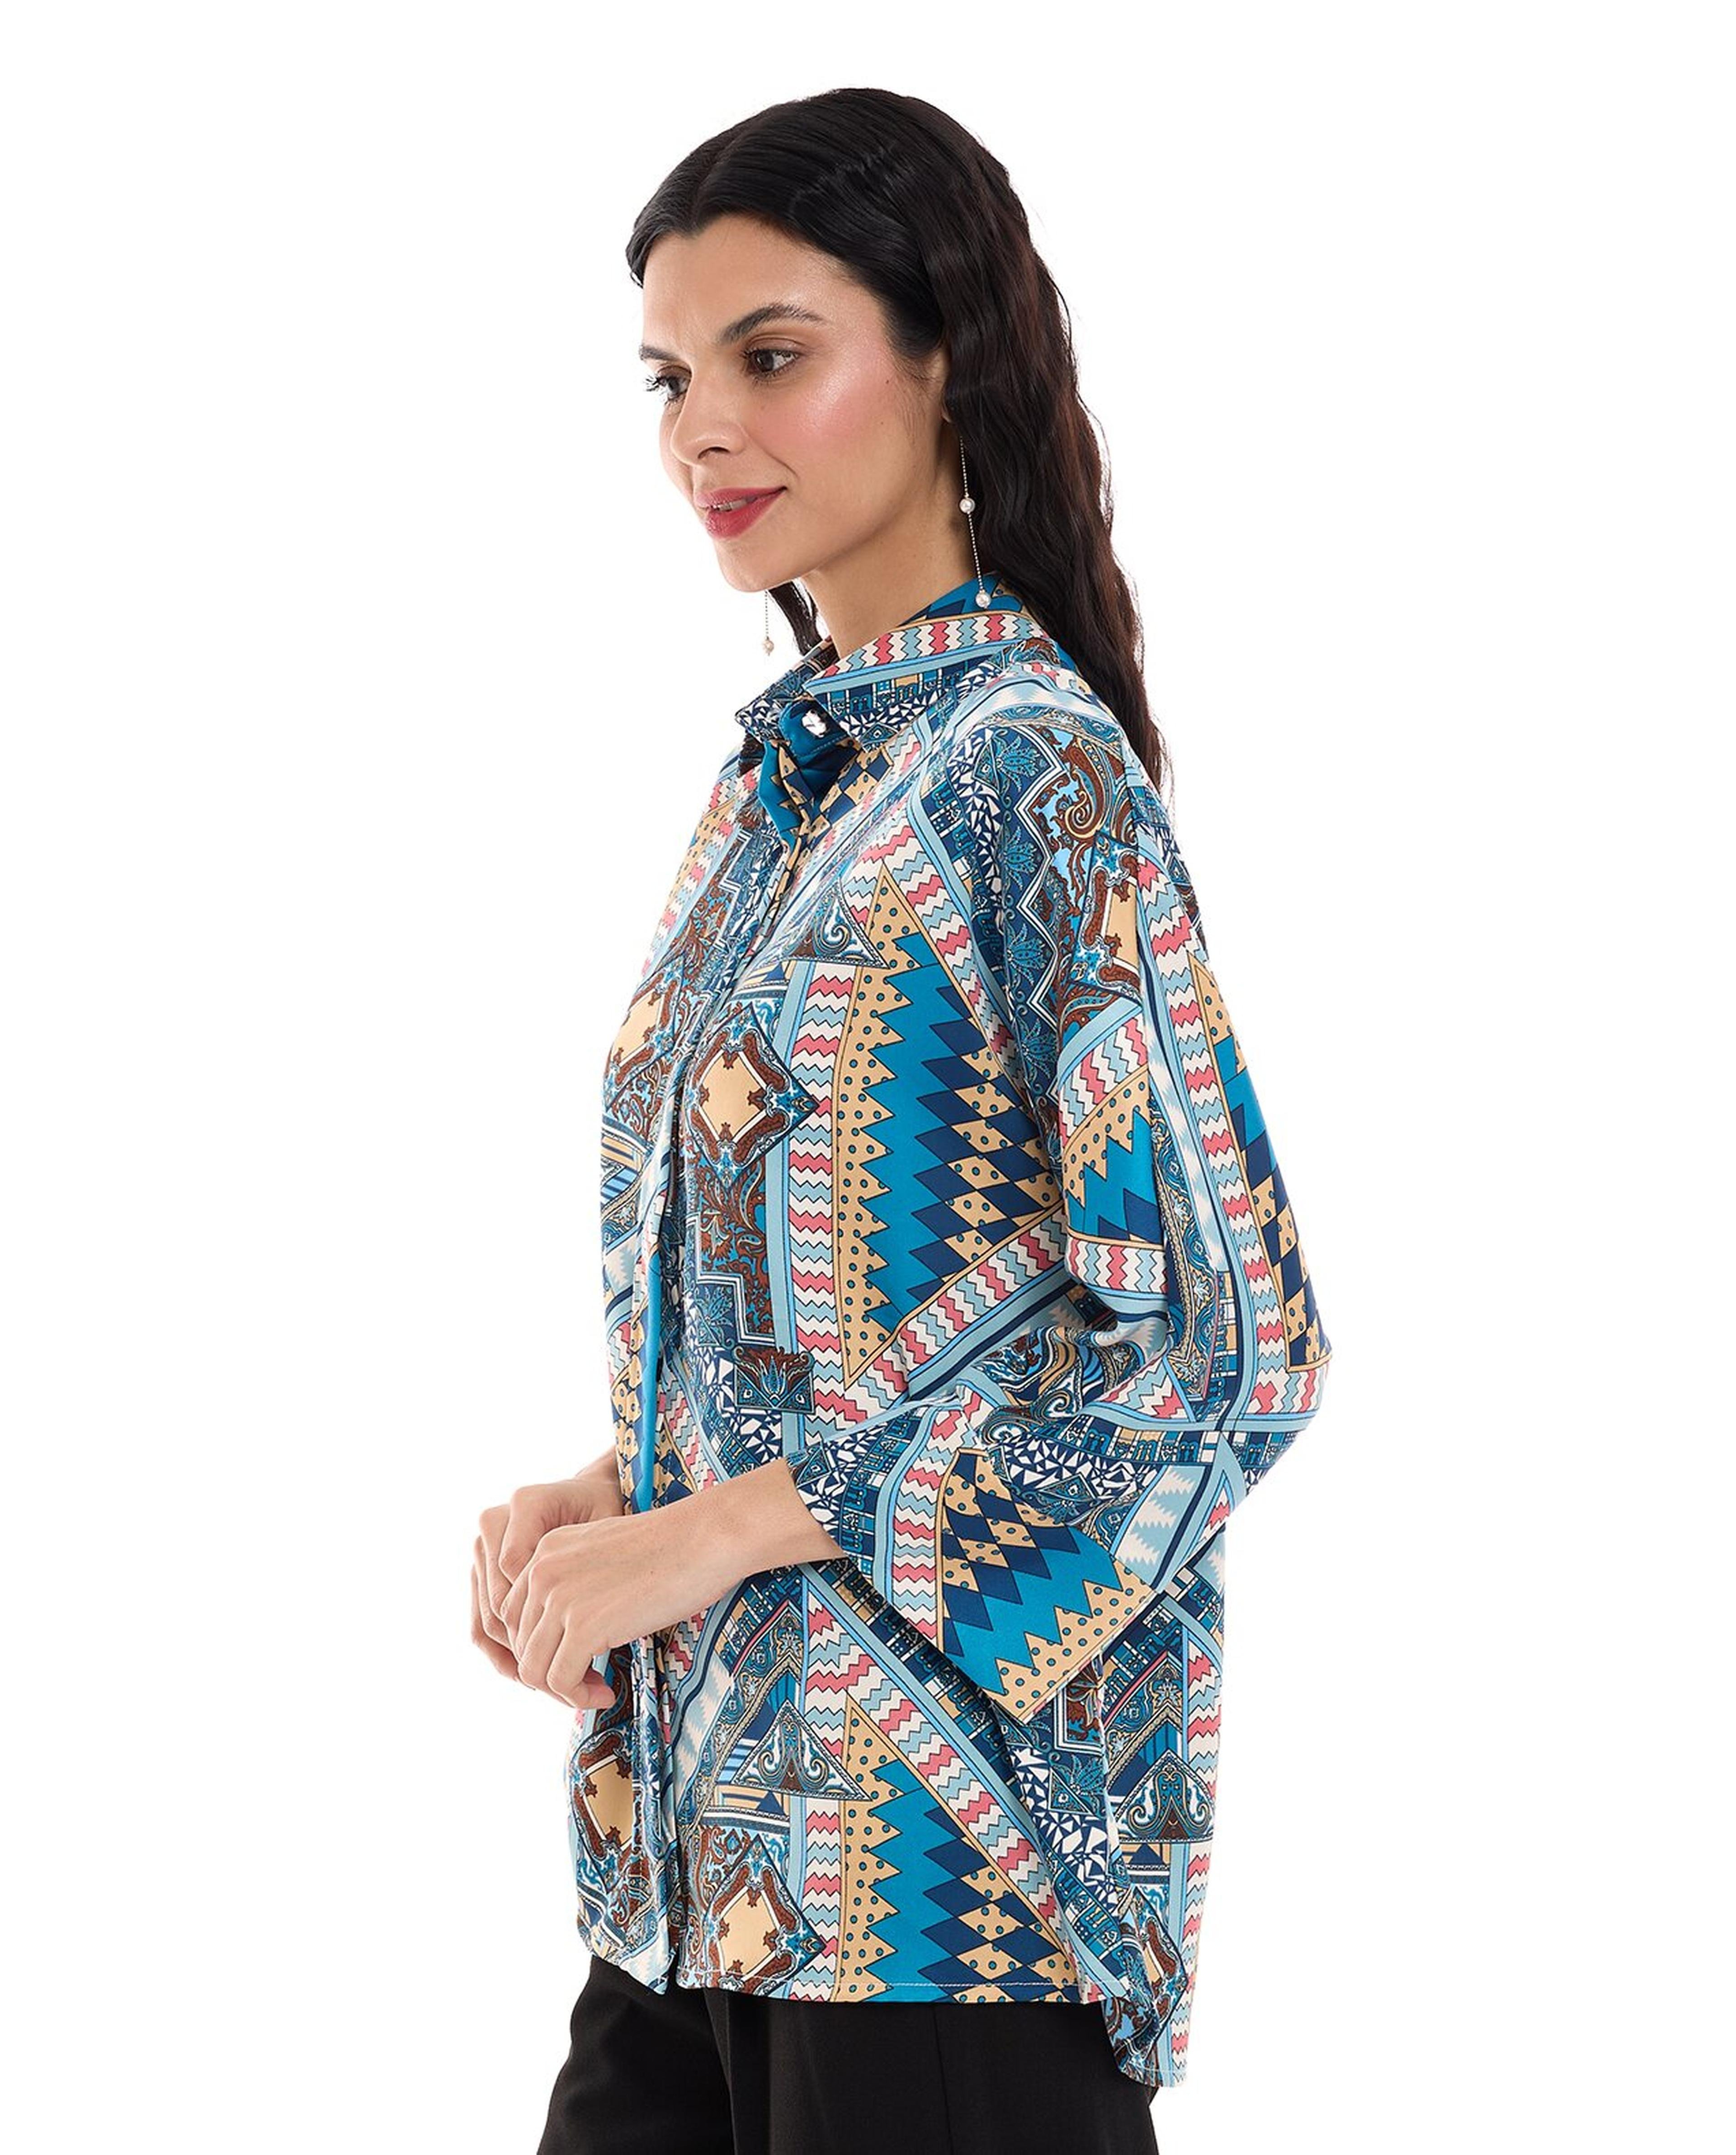 Patterned Shirt with Classic Collar and 3/4 Sleeves